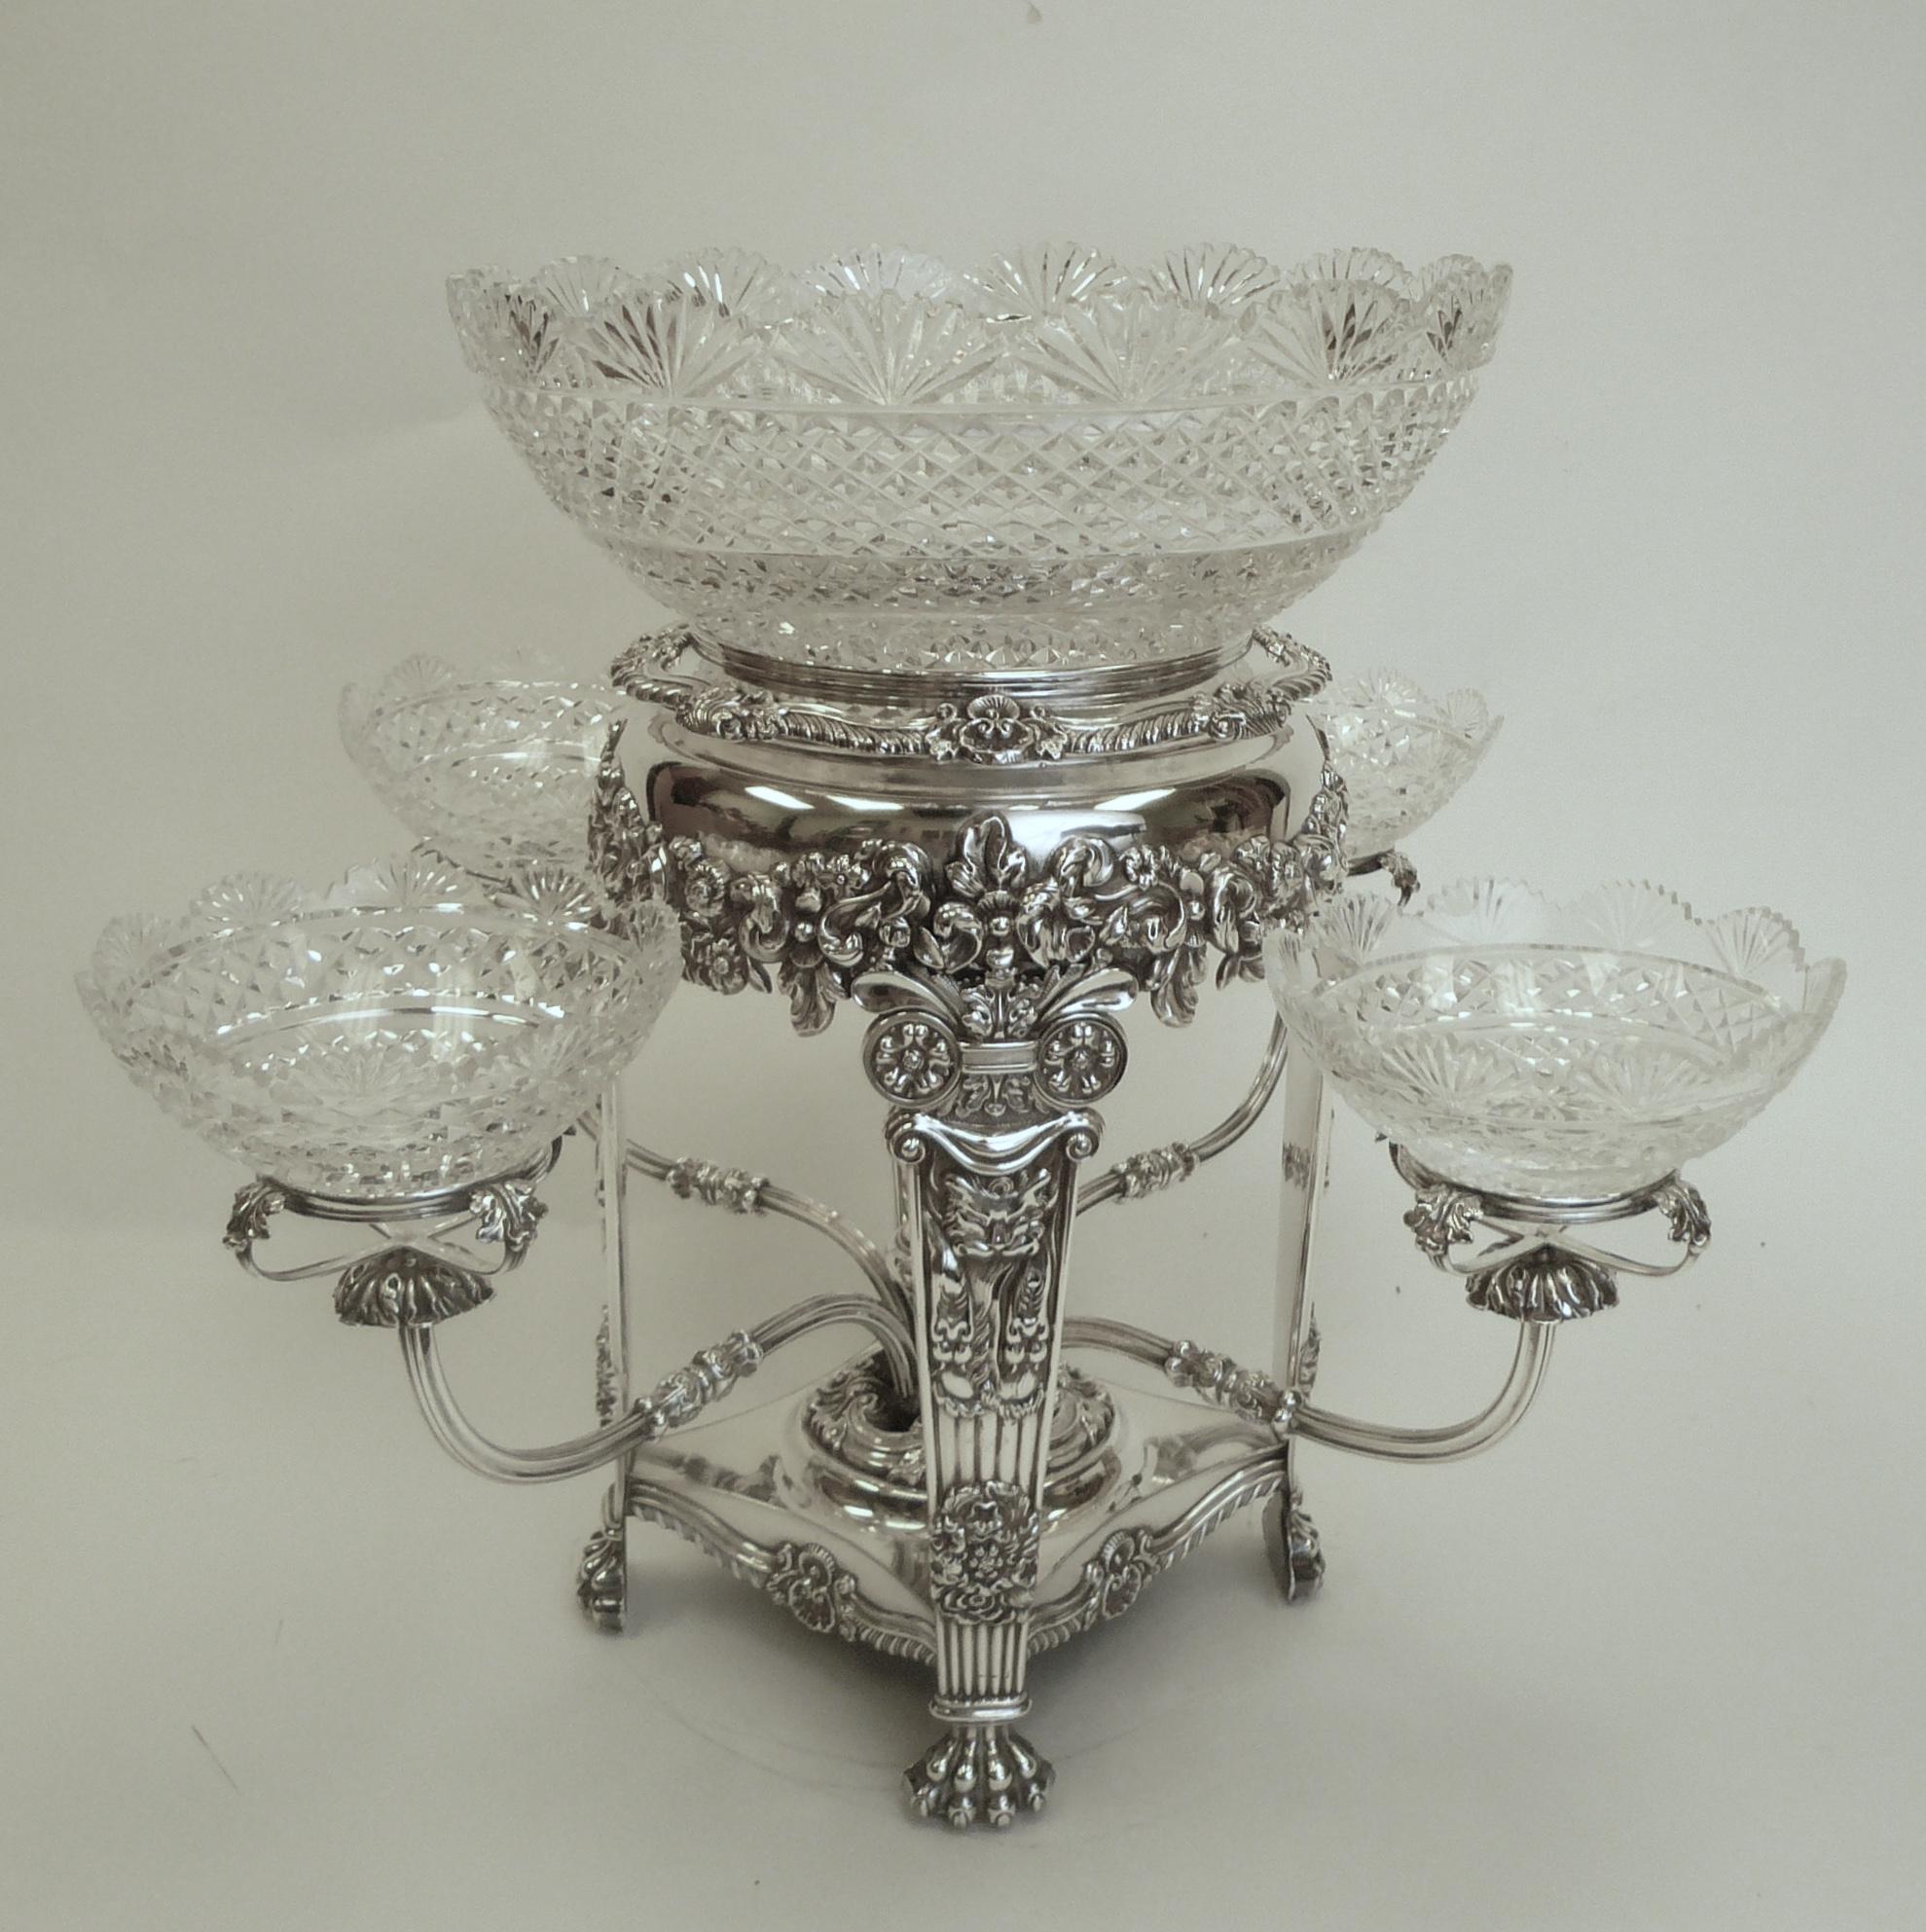 Sheffield Plate English Regency Silver & Cut Crystal Epergne or Centerpiece